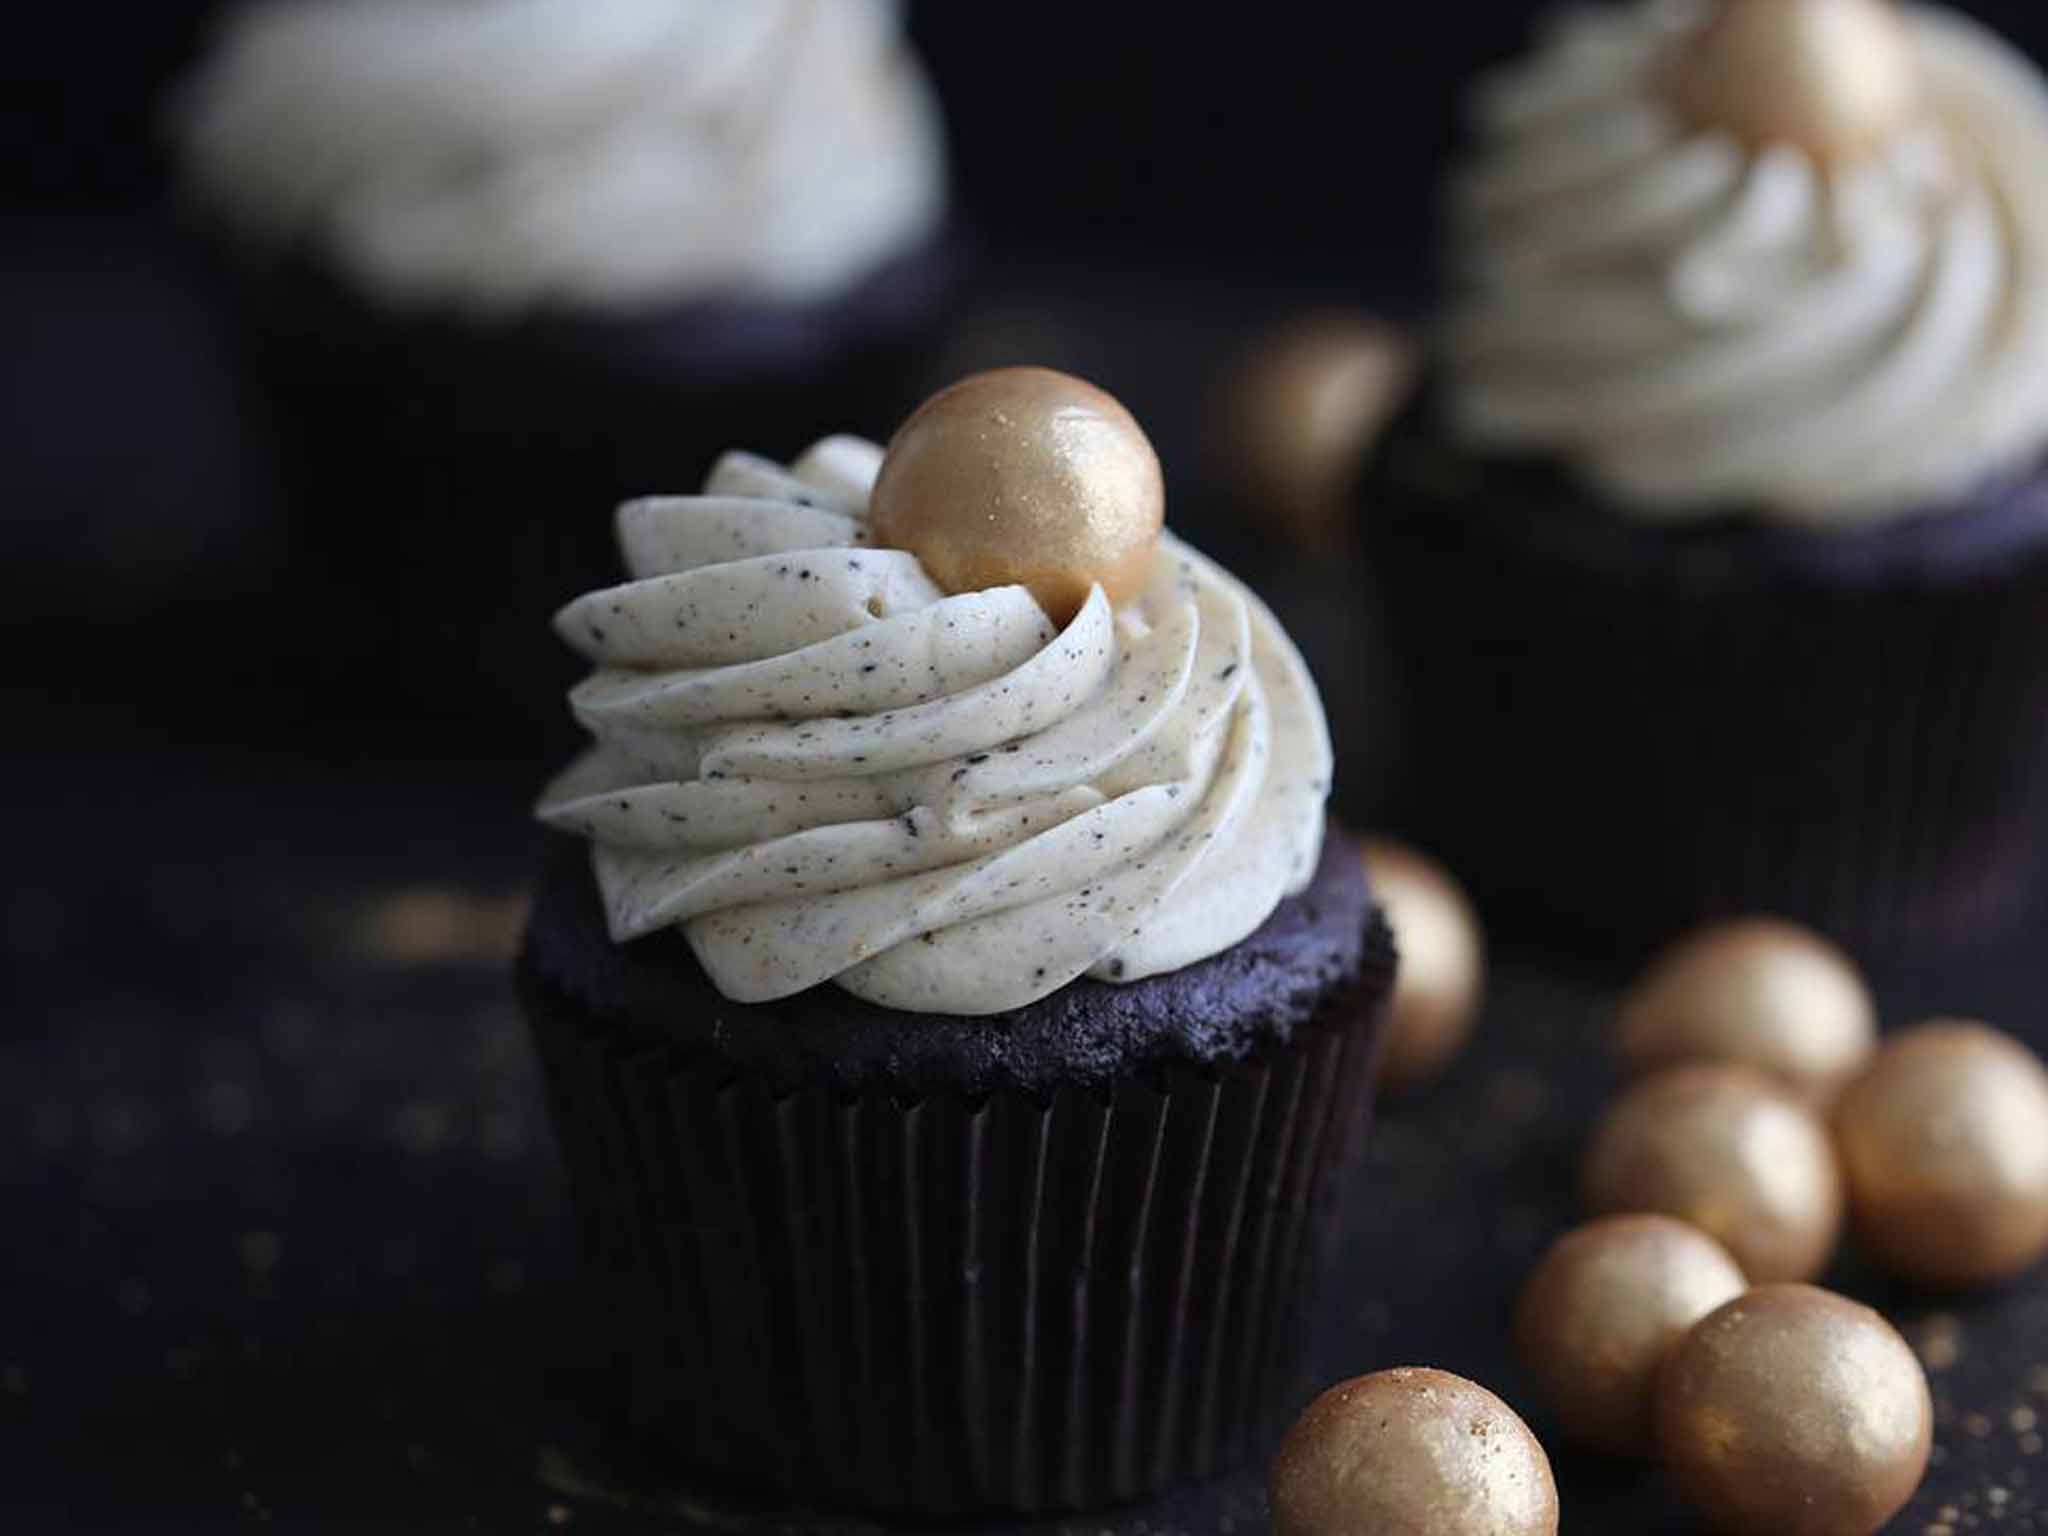 It takes all sorts: cupcakes made with liquorice products from the Danish firm Lakrids